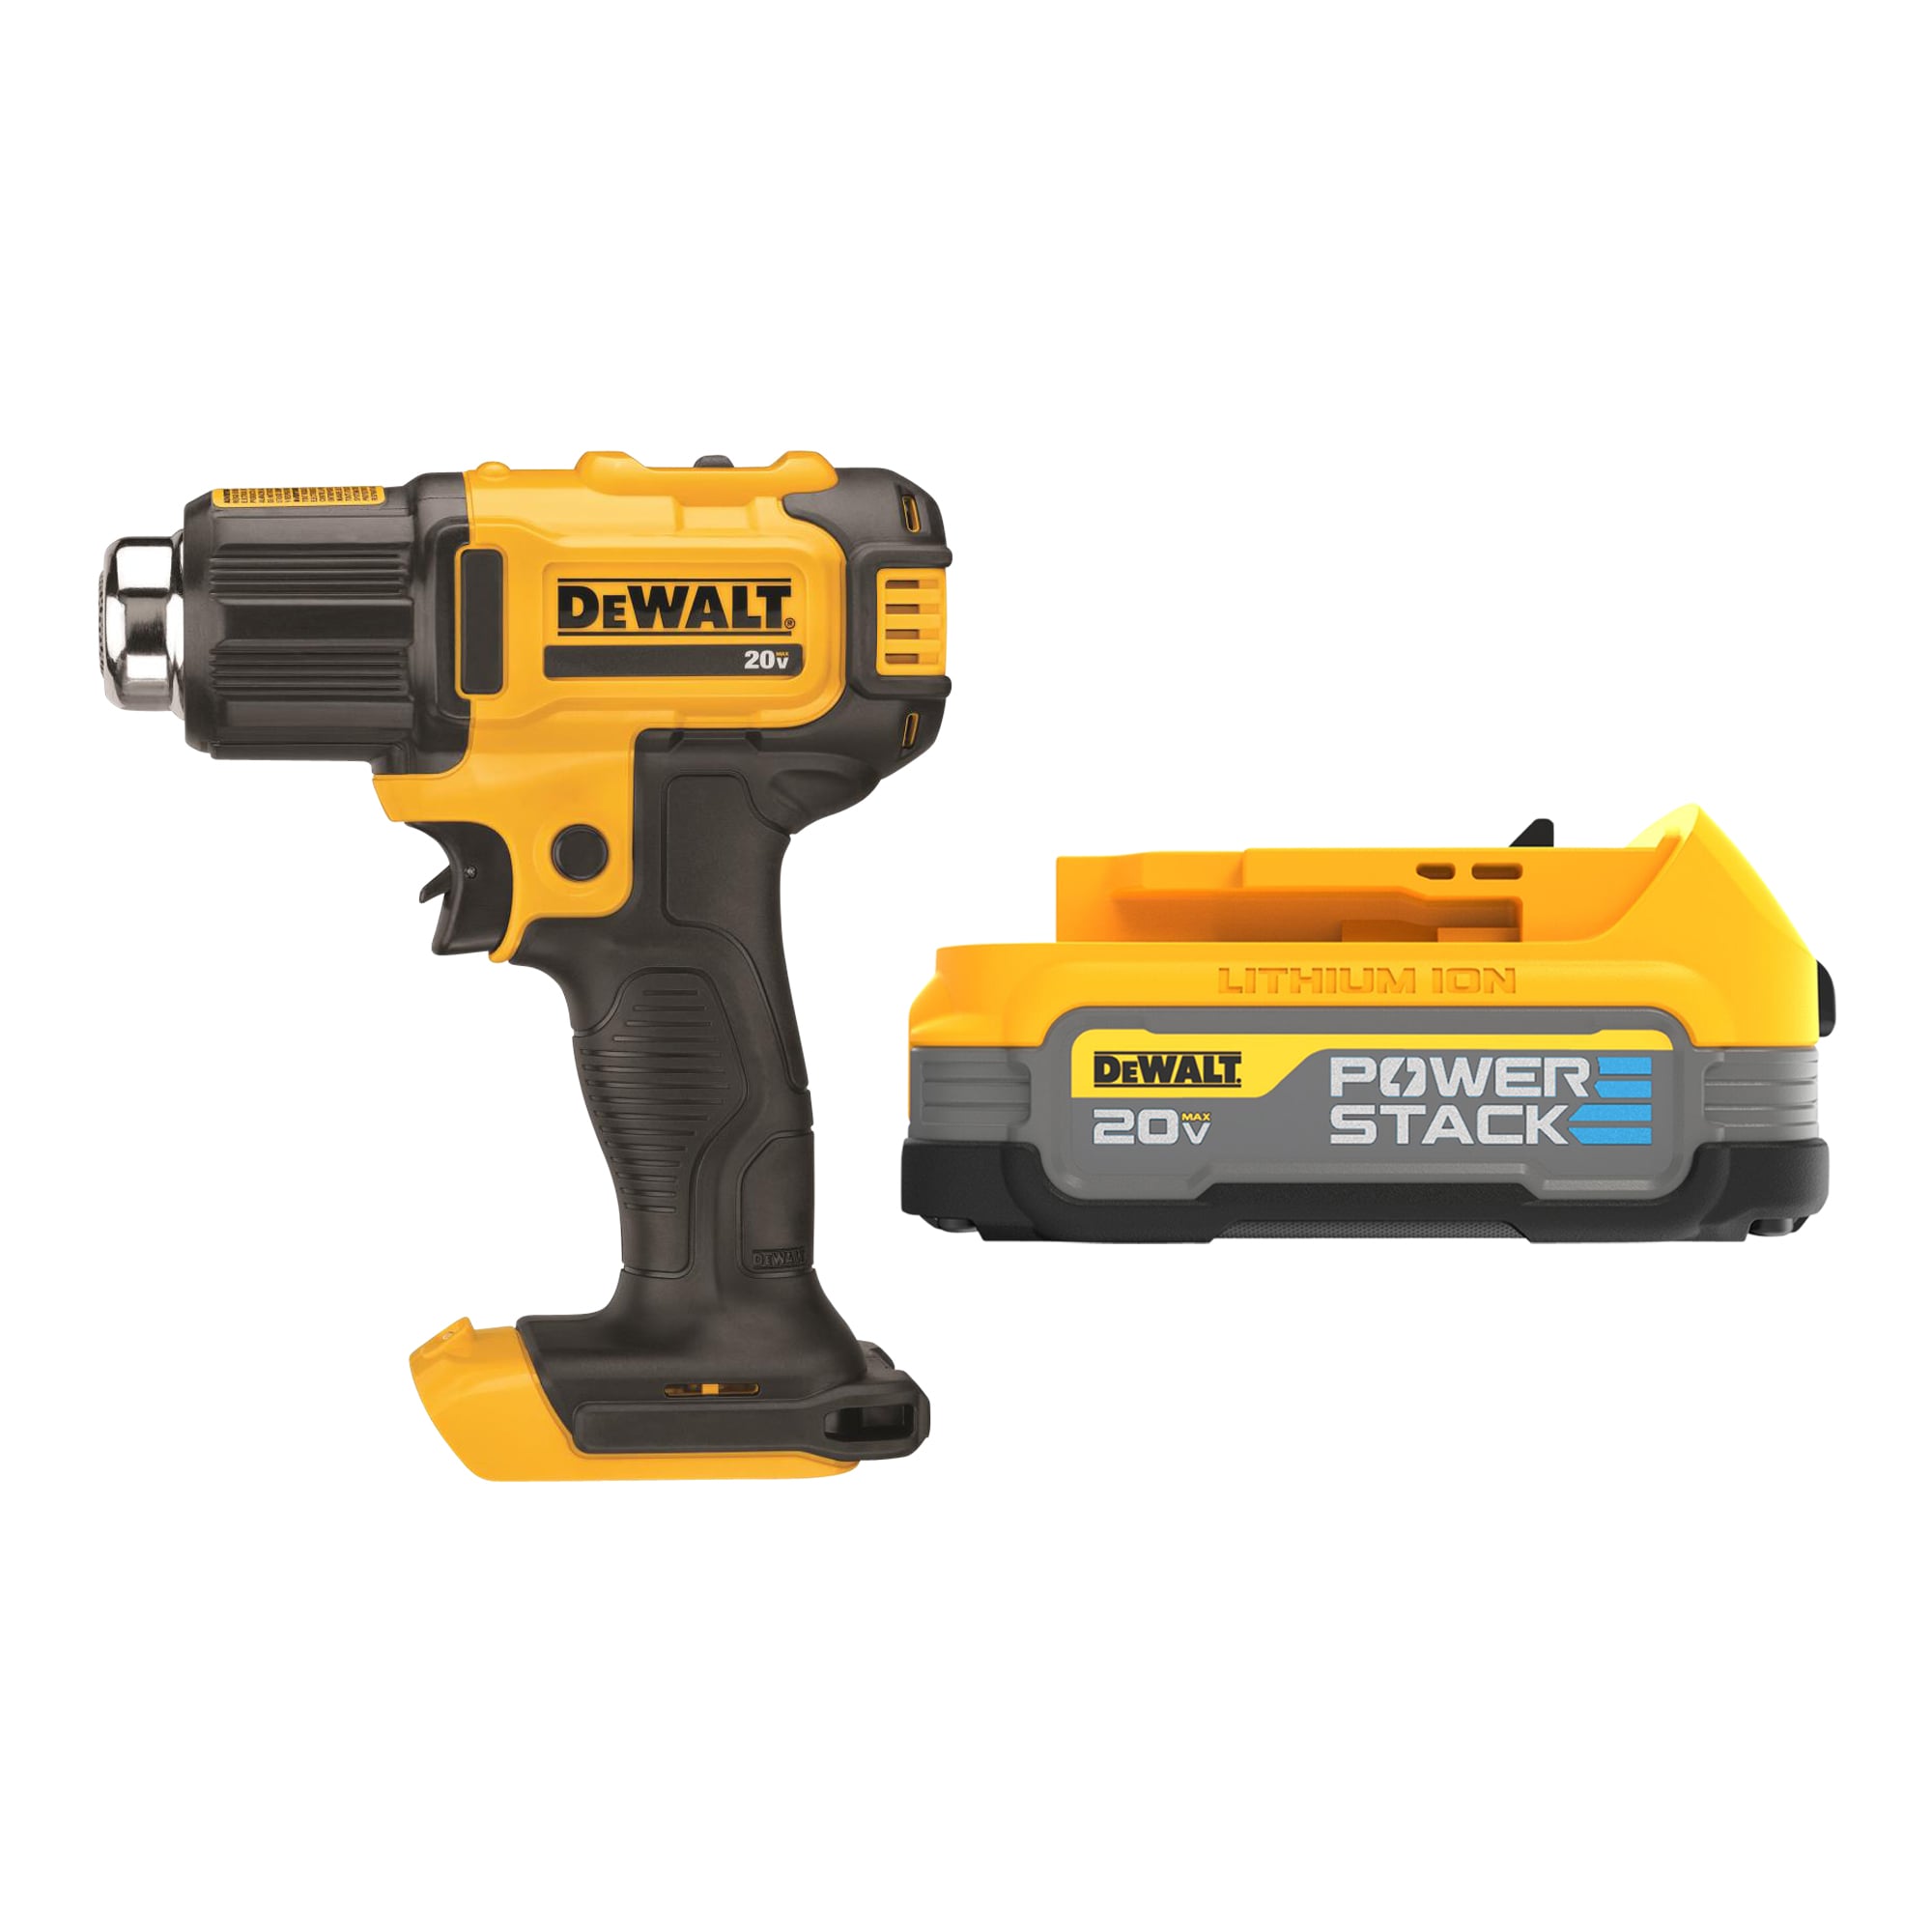 Freebie Flow  Get Free Stuff, Automated on Instagram: FREE DEWALT HEAT  GUN!? 😱🔥 Unleash the power of heat for $0.00! 🌟🔥 Tackle any project  with DeWalt precision without turning up your